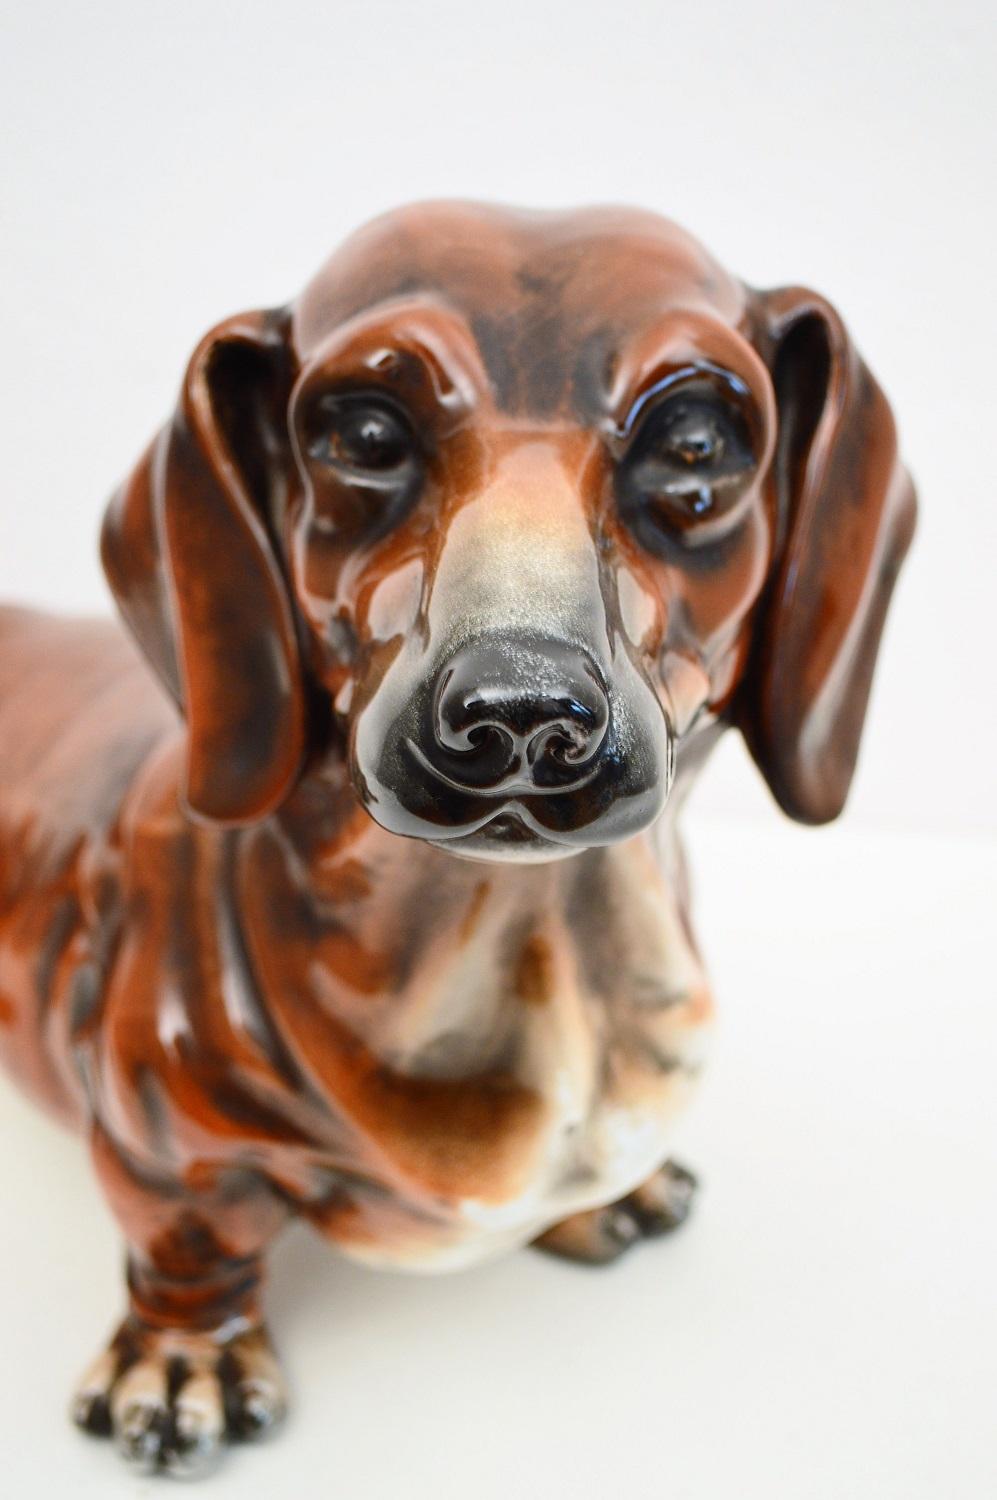 Gorgeous big dachshund in life-size made of ceramic by Ugo Zaccagnini Urbano, Italy, back in the 1960s.
This ceramic sculpture is painted in a way the dog seems real. Please see the last picture with a wine bottle in order to show the size of the